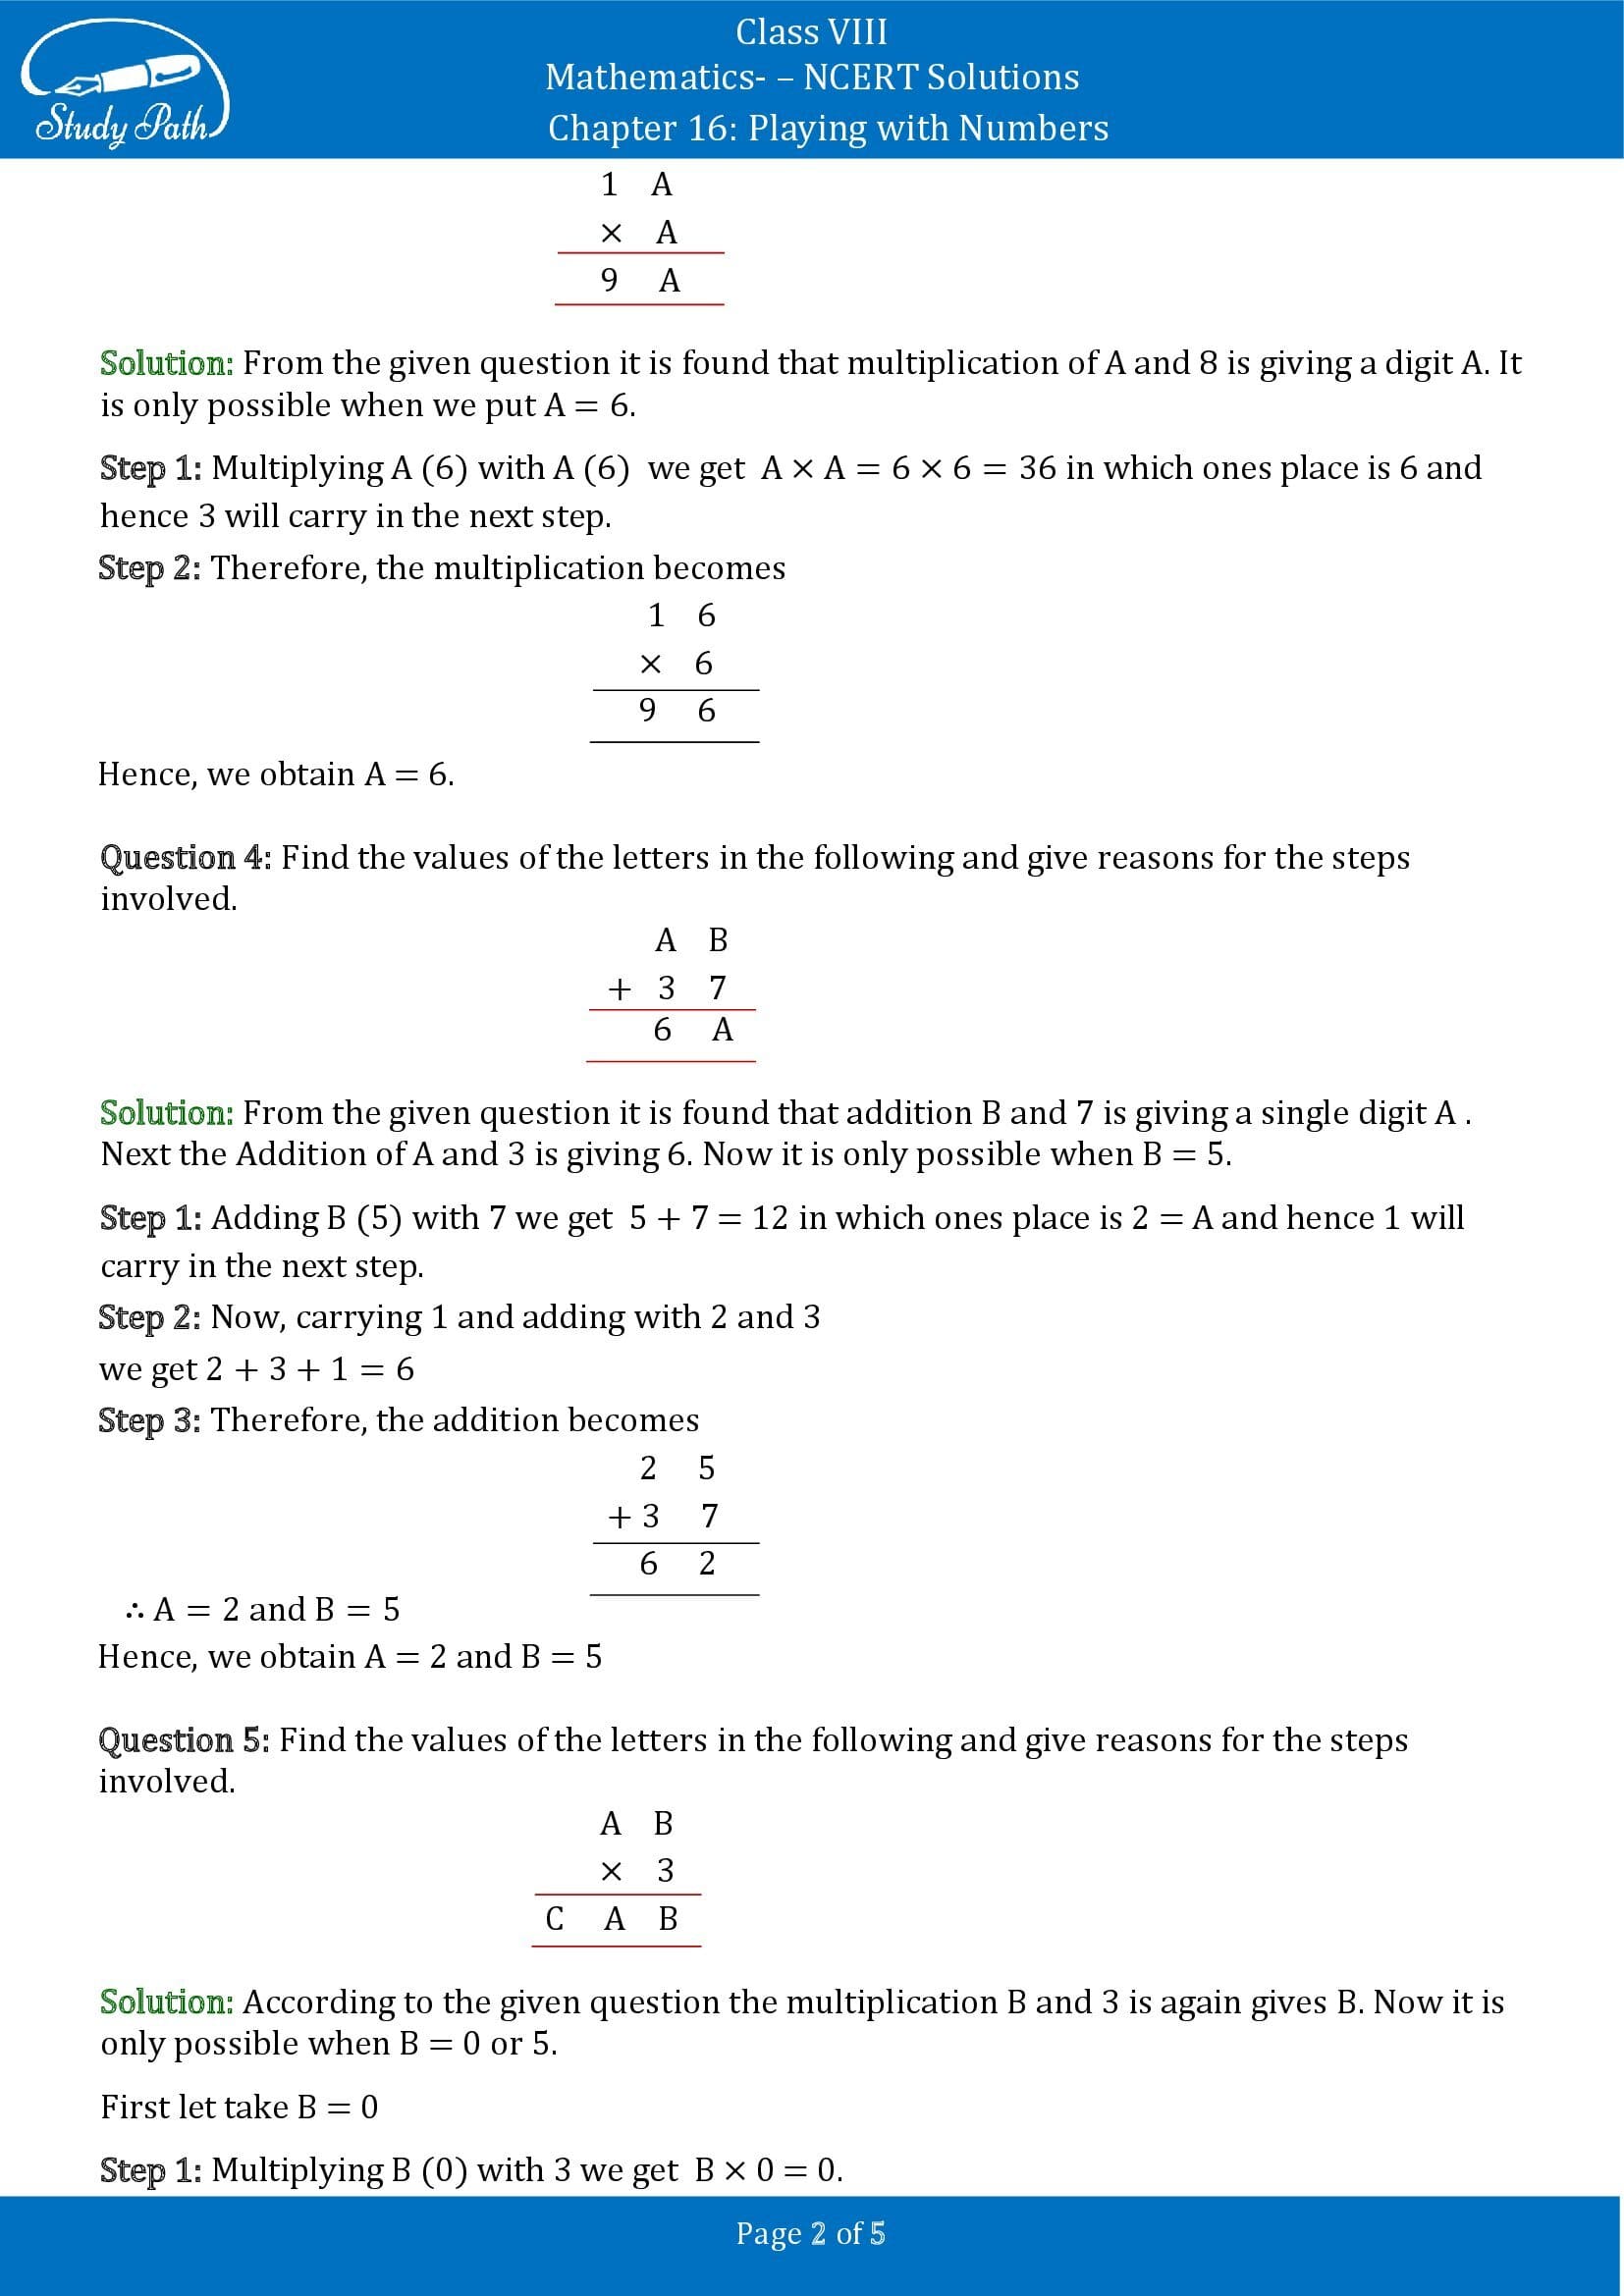 NCERT Solutions for Class 8 Maths Chapter 16 Playing with Numbers Exercise 16.1 00002